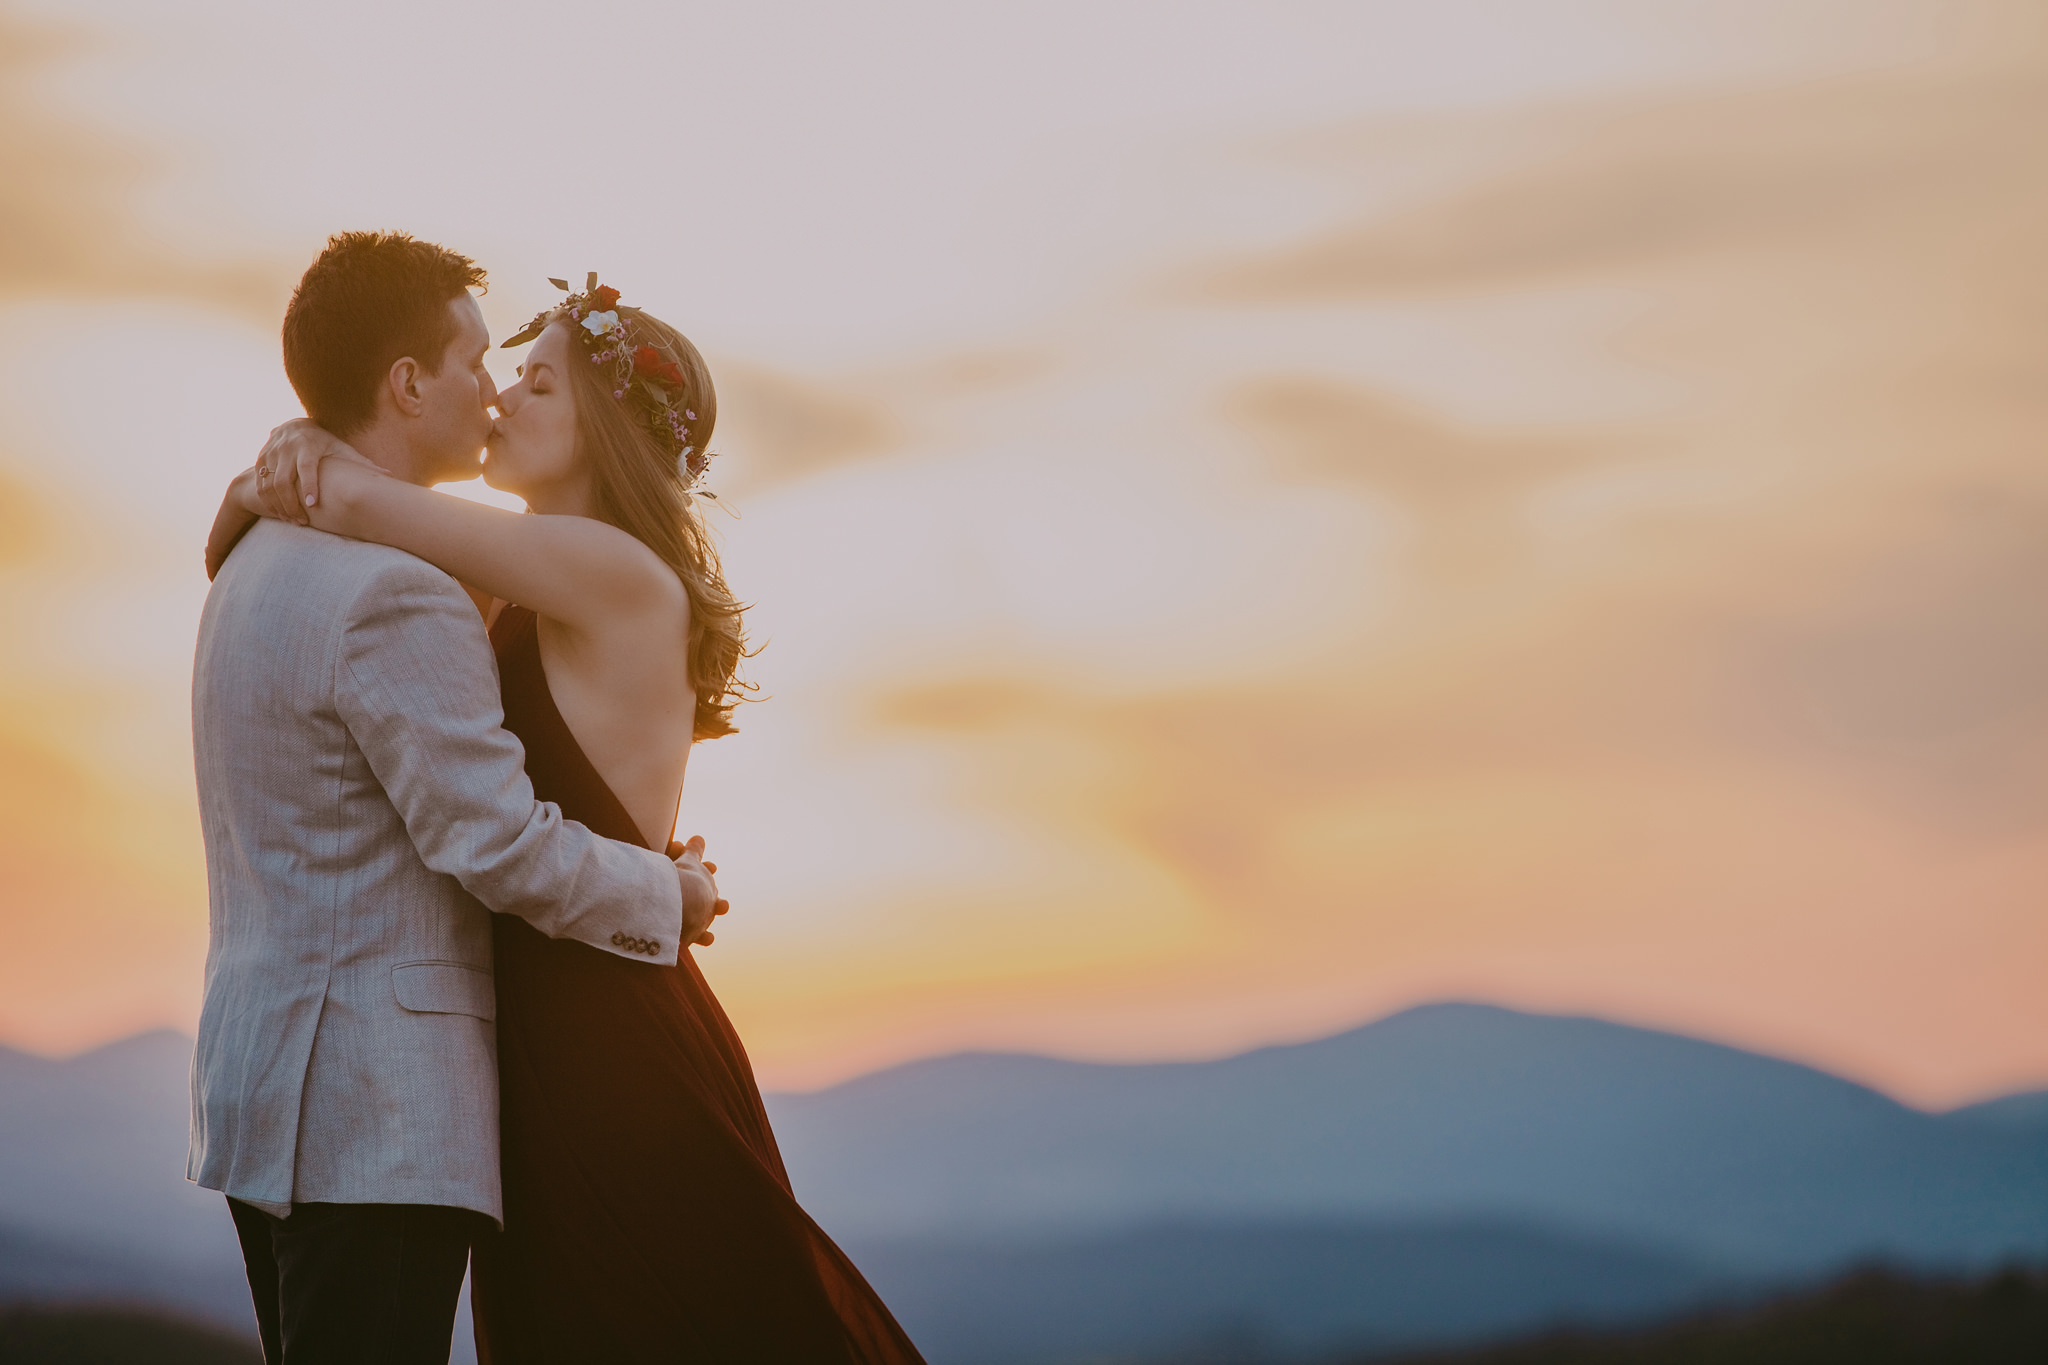 Mabyn Ludke Photography stayed till sunset as this adorable couple celebrated their anniversary at Doughton Park in North Carolina's Blue Ridge Parkway.